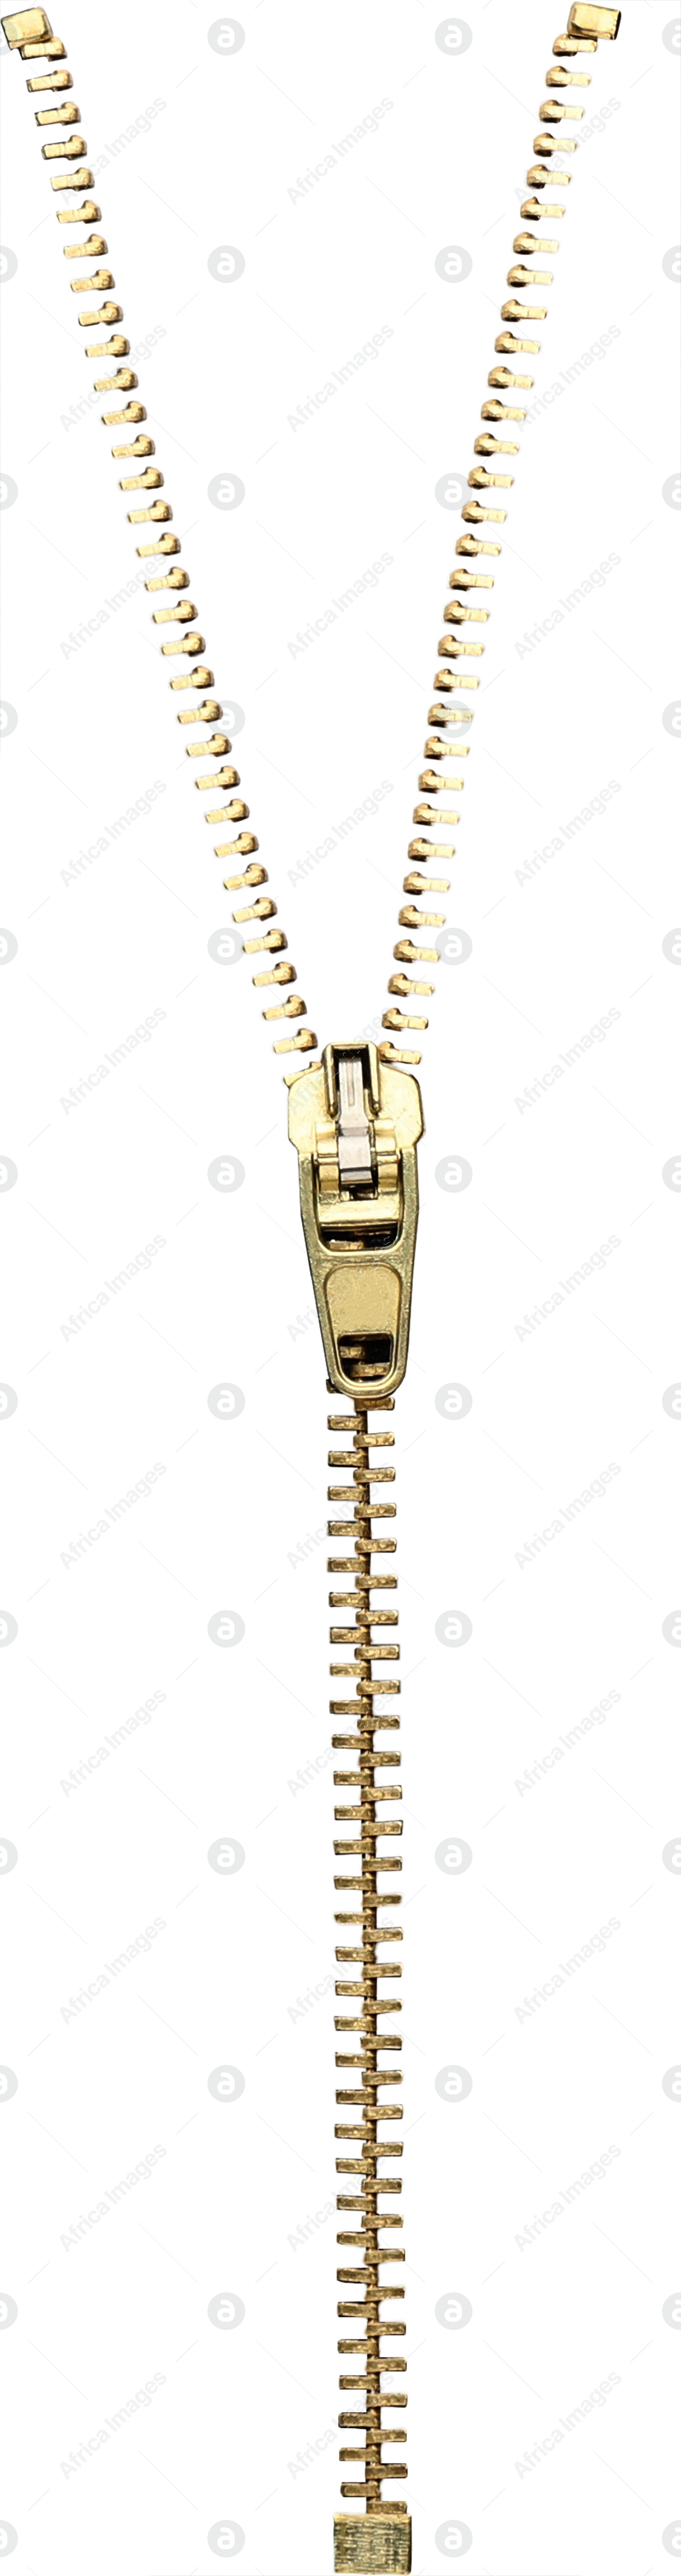 Image of Metal zipper isolated on white. Vertical banner design